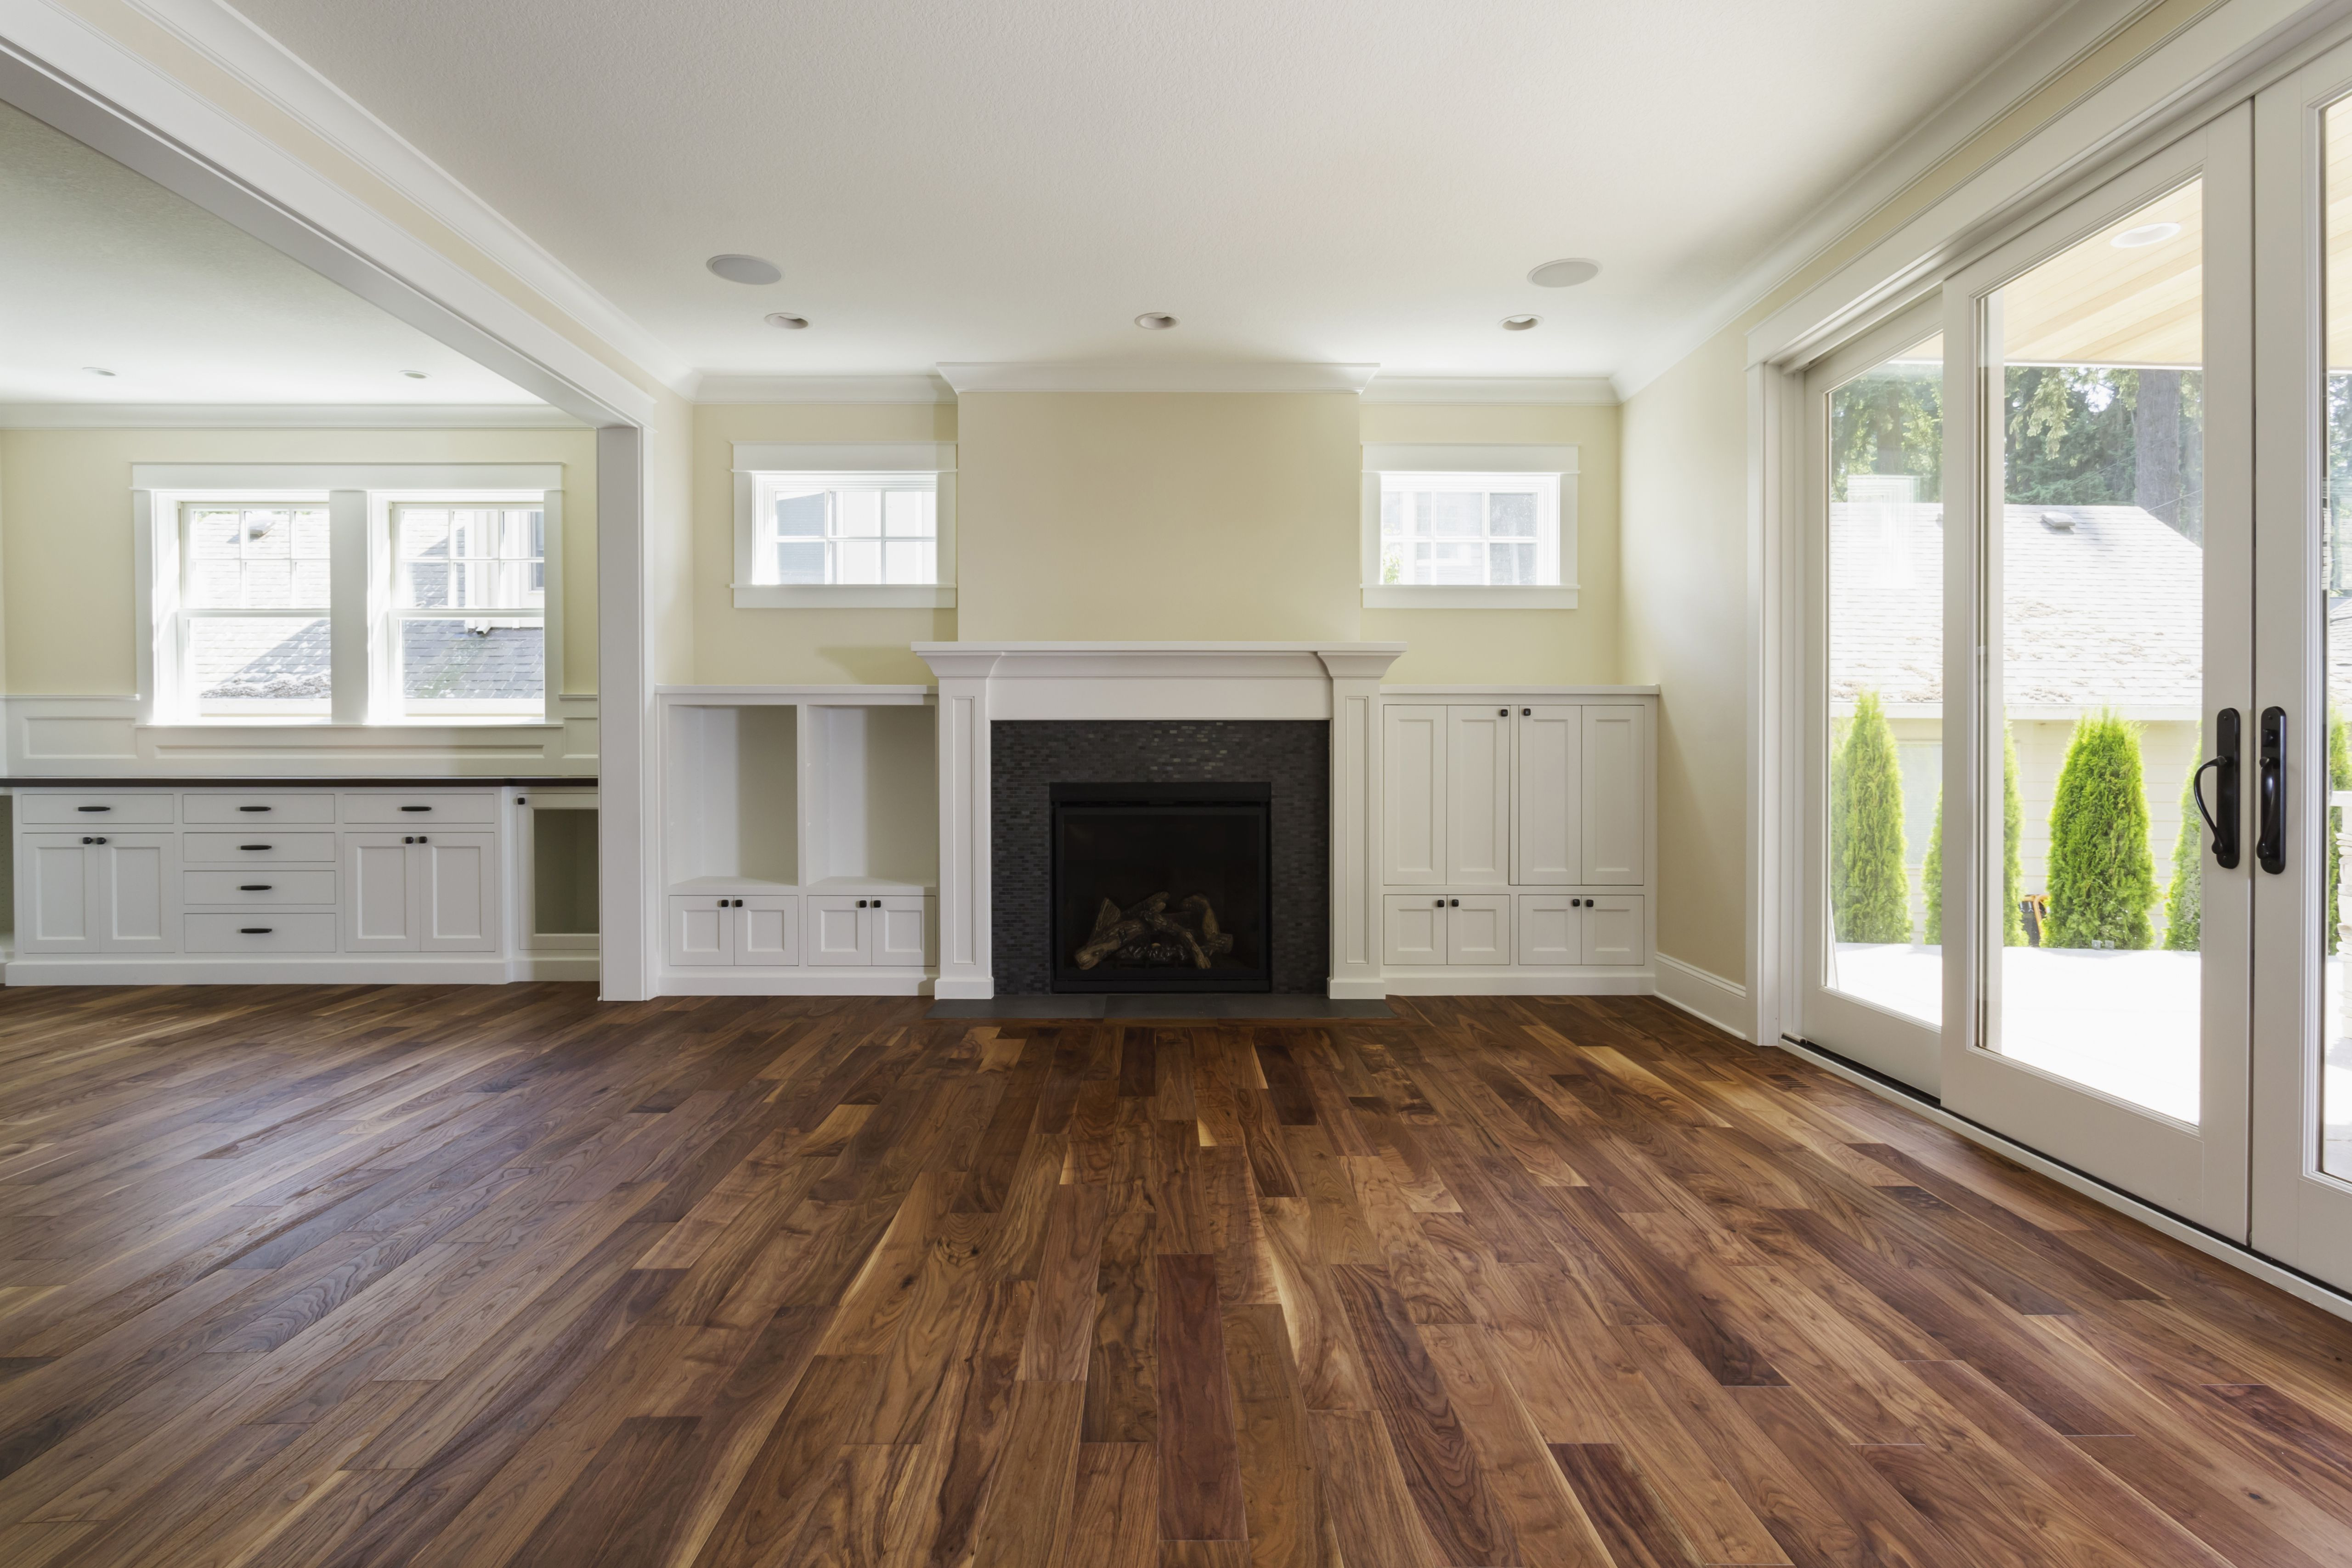 22 Amazing Hardwood Flooring On Concrete Floor 2024 free download hardwood flooring on concrete floor of the pros and cons of prefinished hardwood flooring inside fireplace and built in shelves in living room 482143011 57bef8e33df78cc16e035397